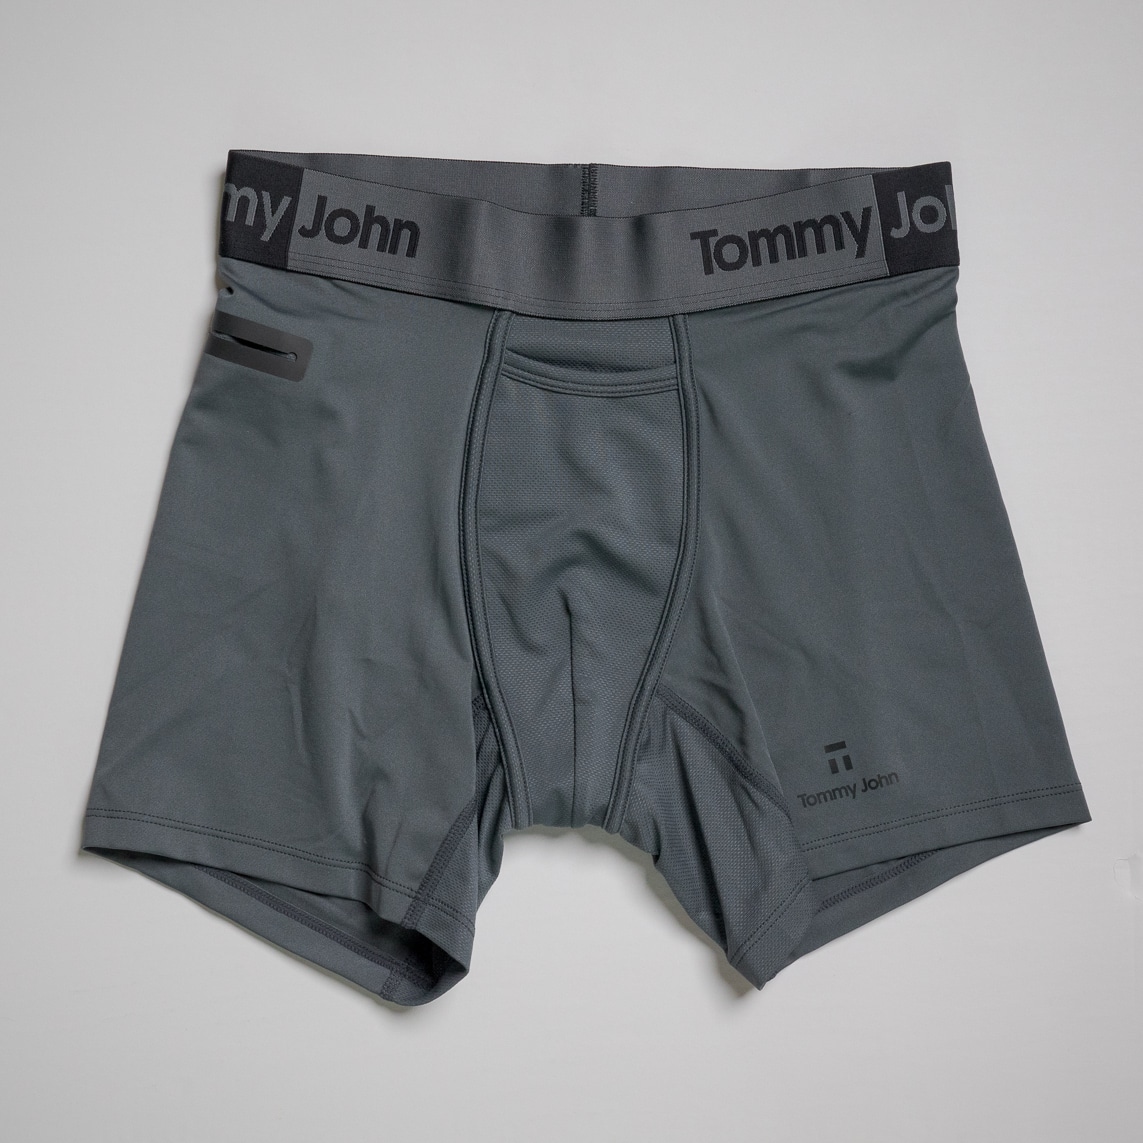 Tommy John Mens cool cotton Trunks - 3 Pack - comfortable